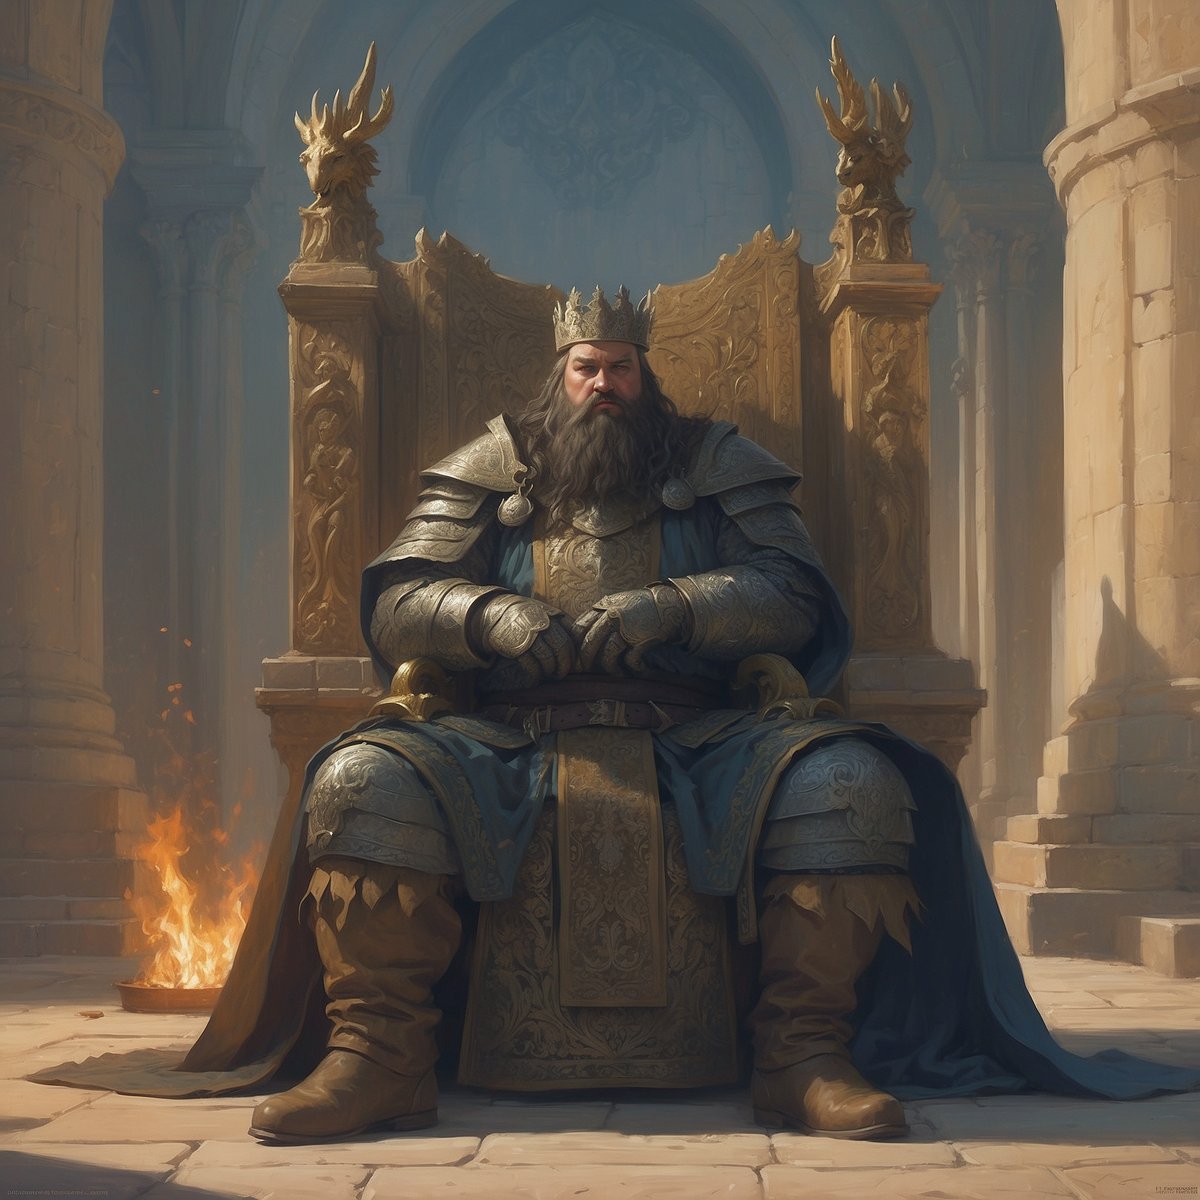 From rebellion to reign, Robert Baratheon claimed the Iron Throne with might and valor. Share your own tales of ascension! #GameOfThrones #RobertBaratheon #Westeros